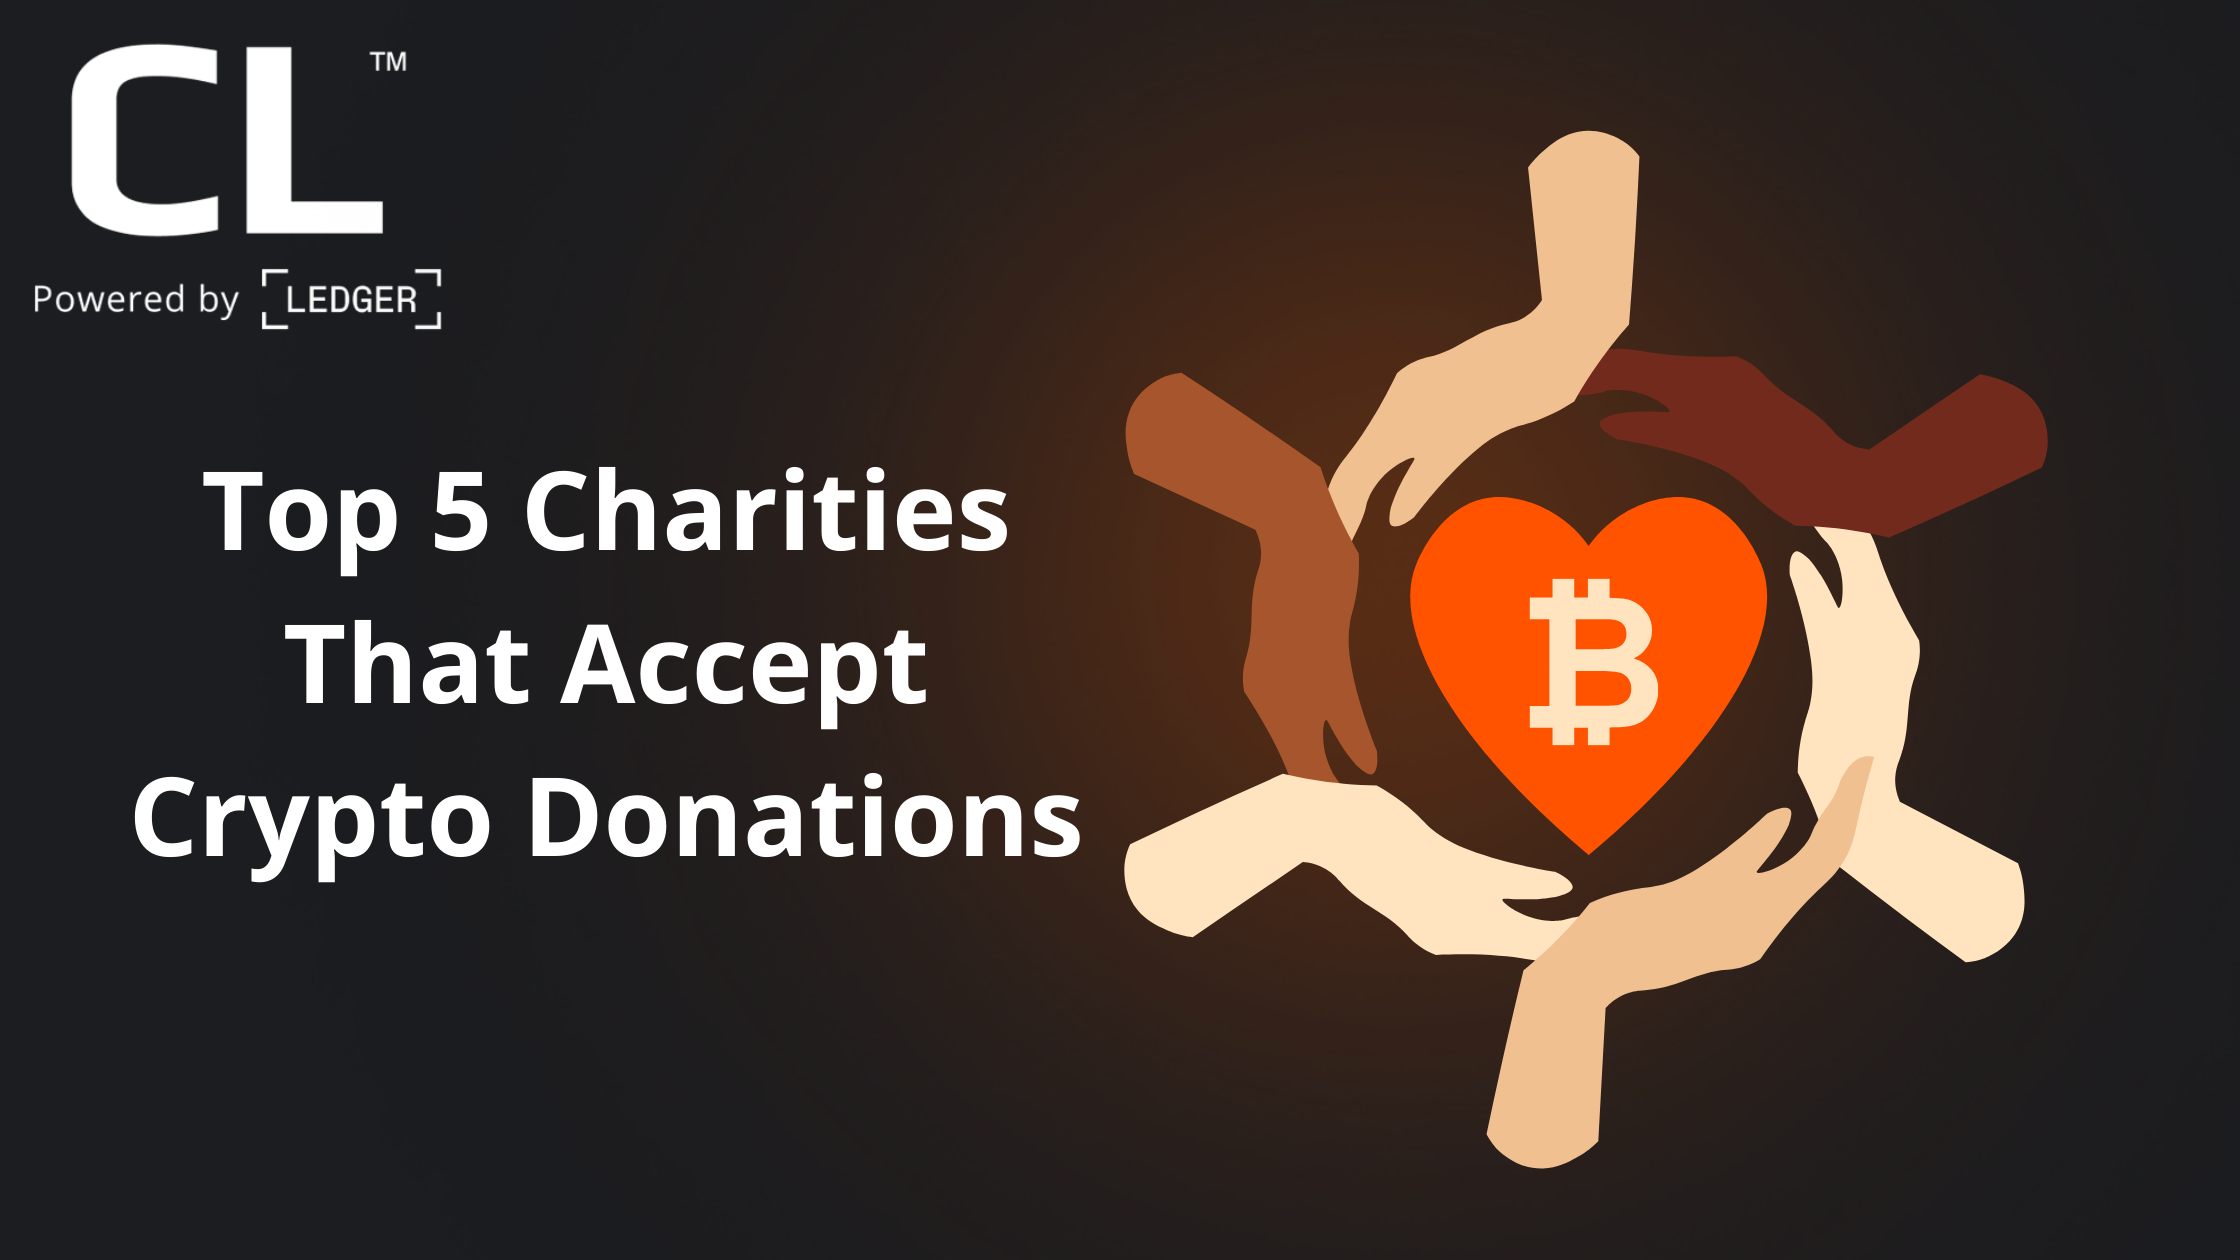 Charities that accept crypto